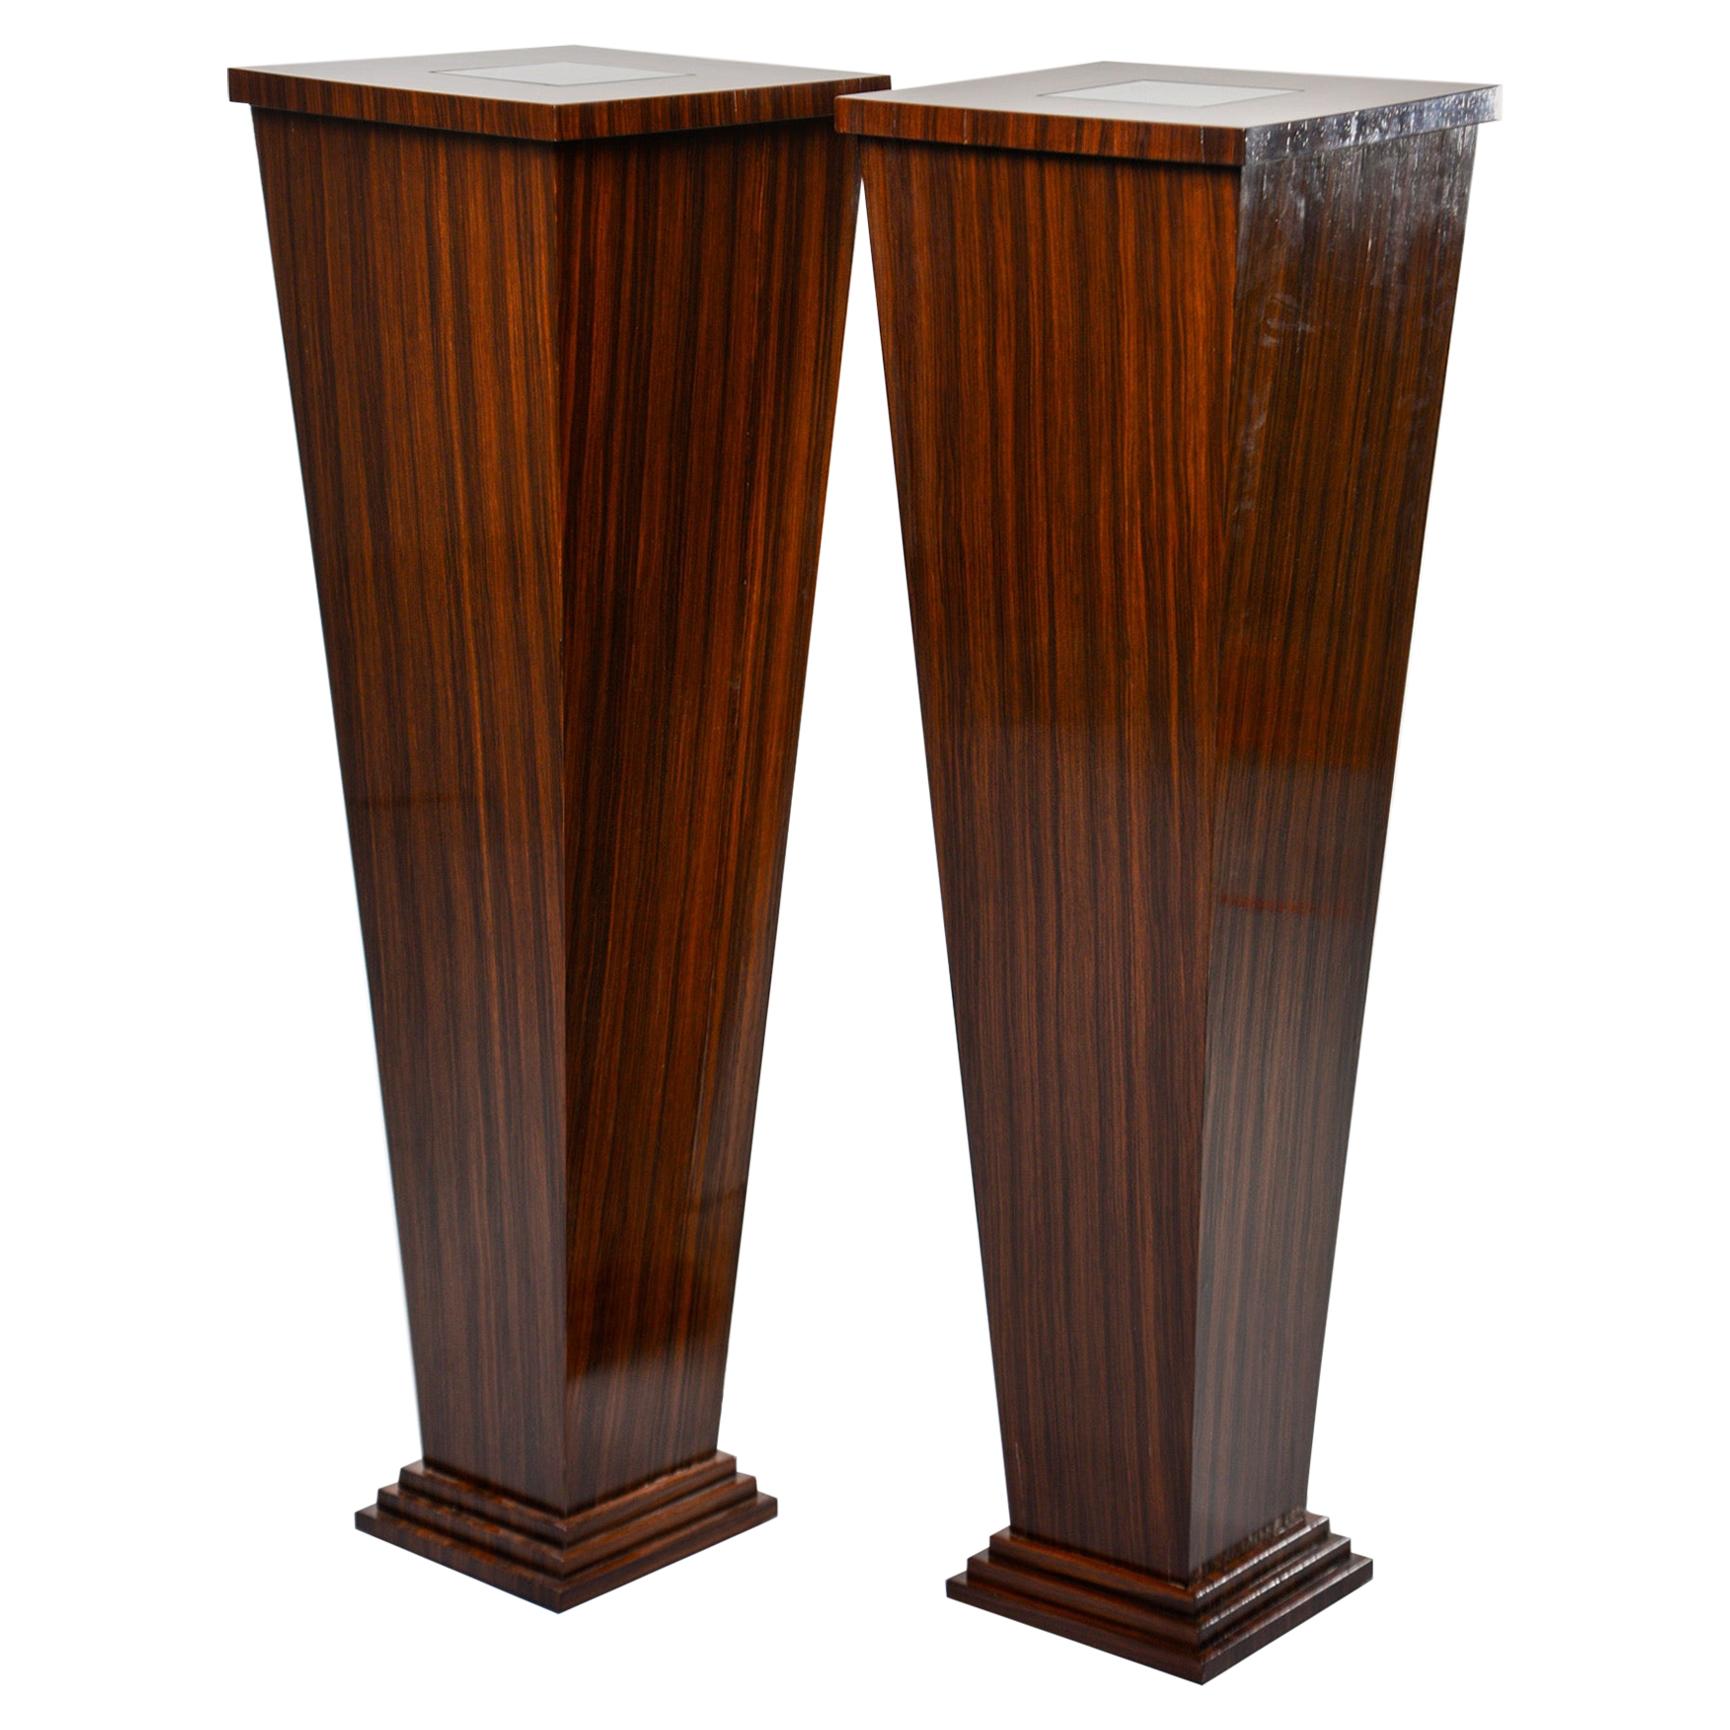 Pair of Tall Bespoke Walnut Display Stands with Interior under Light